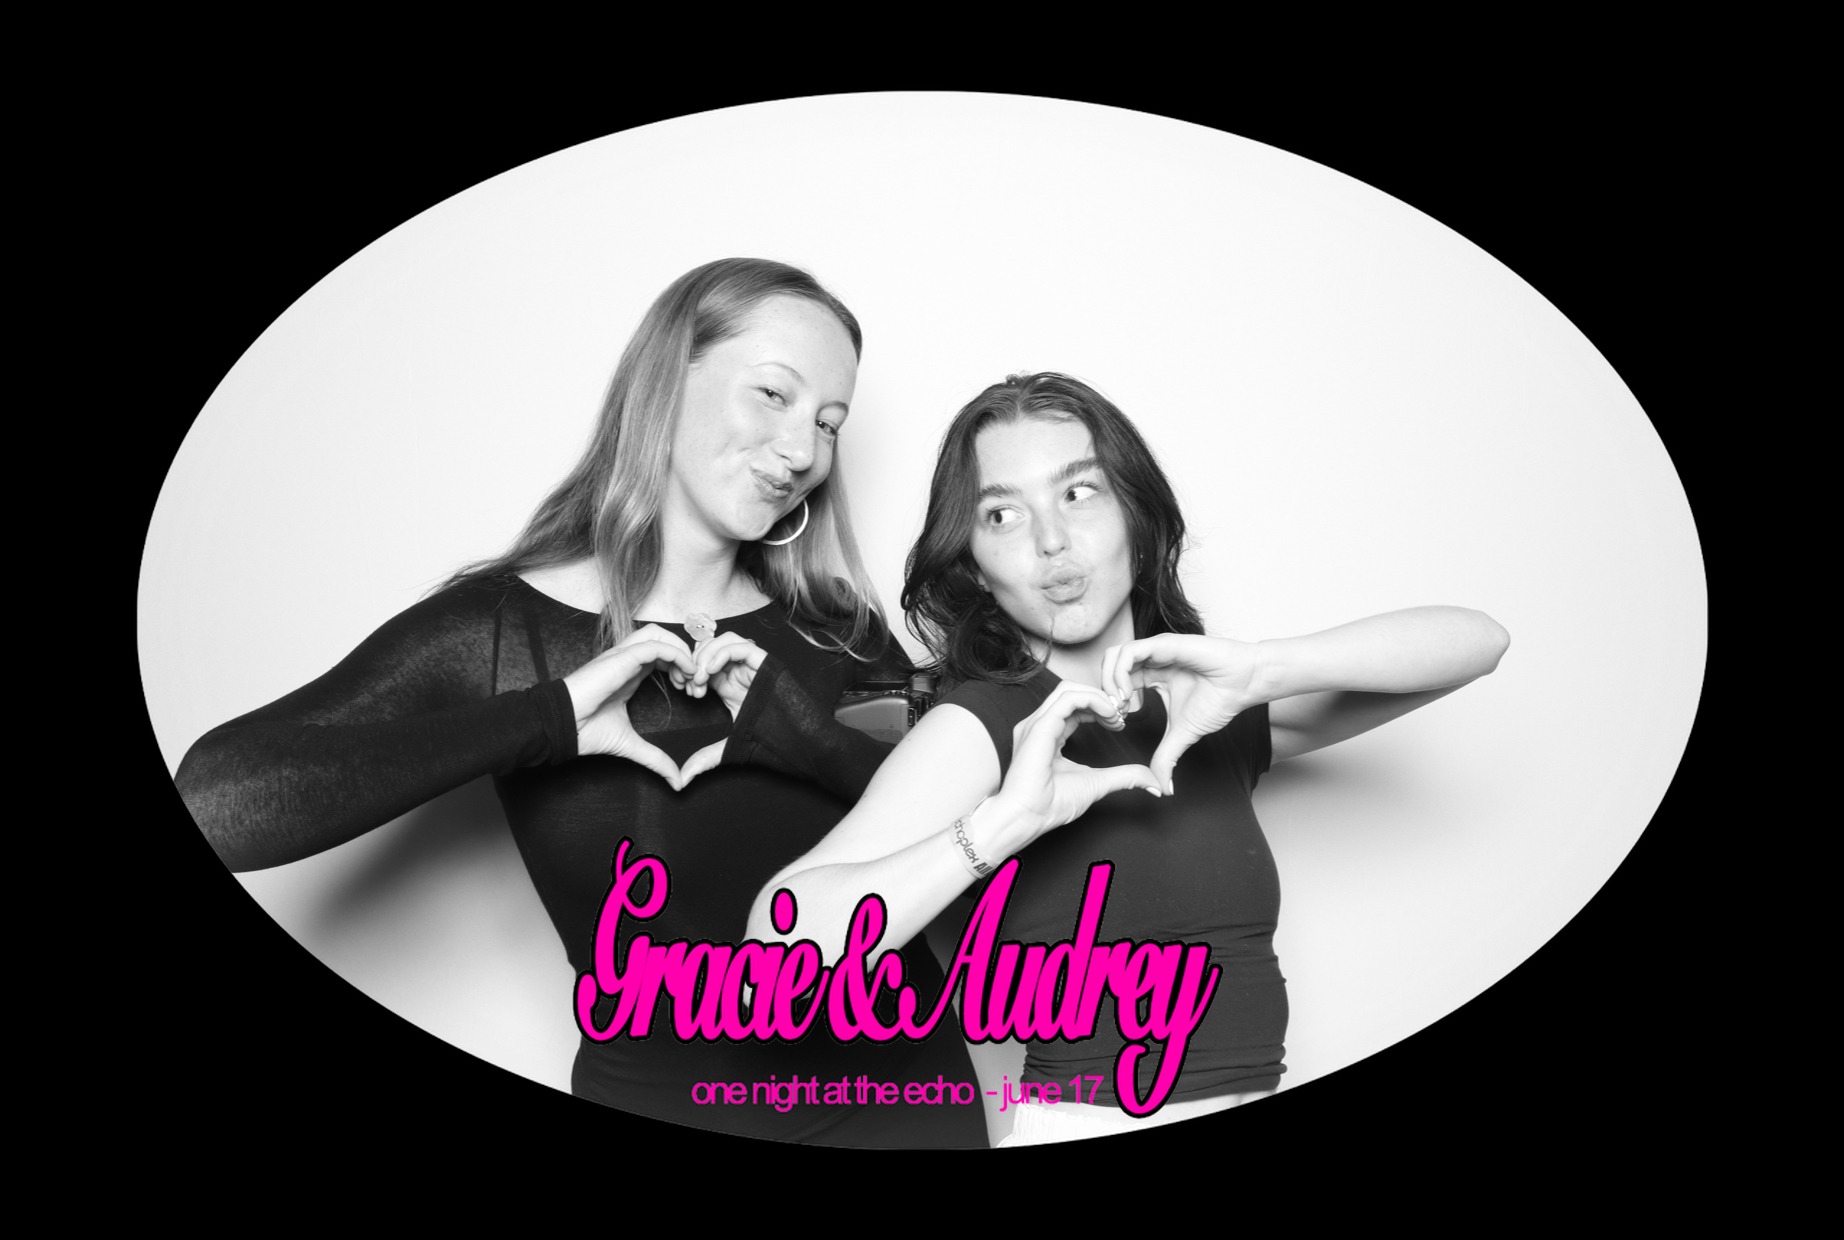 Two female guests posing for a photo making hearts with their hands